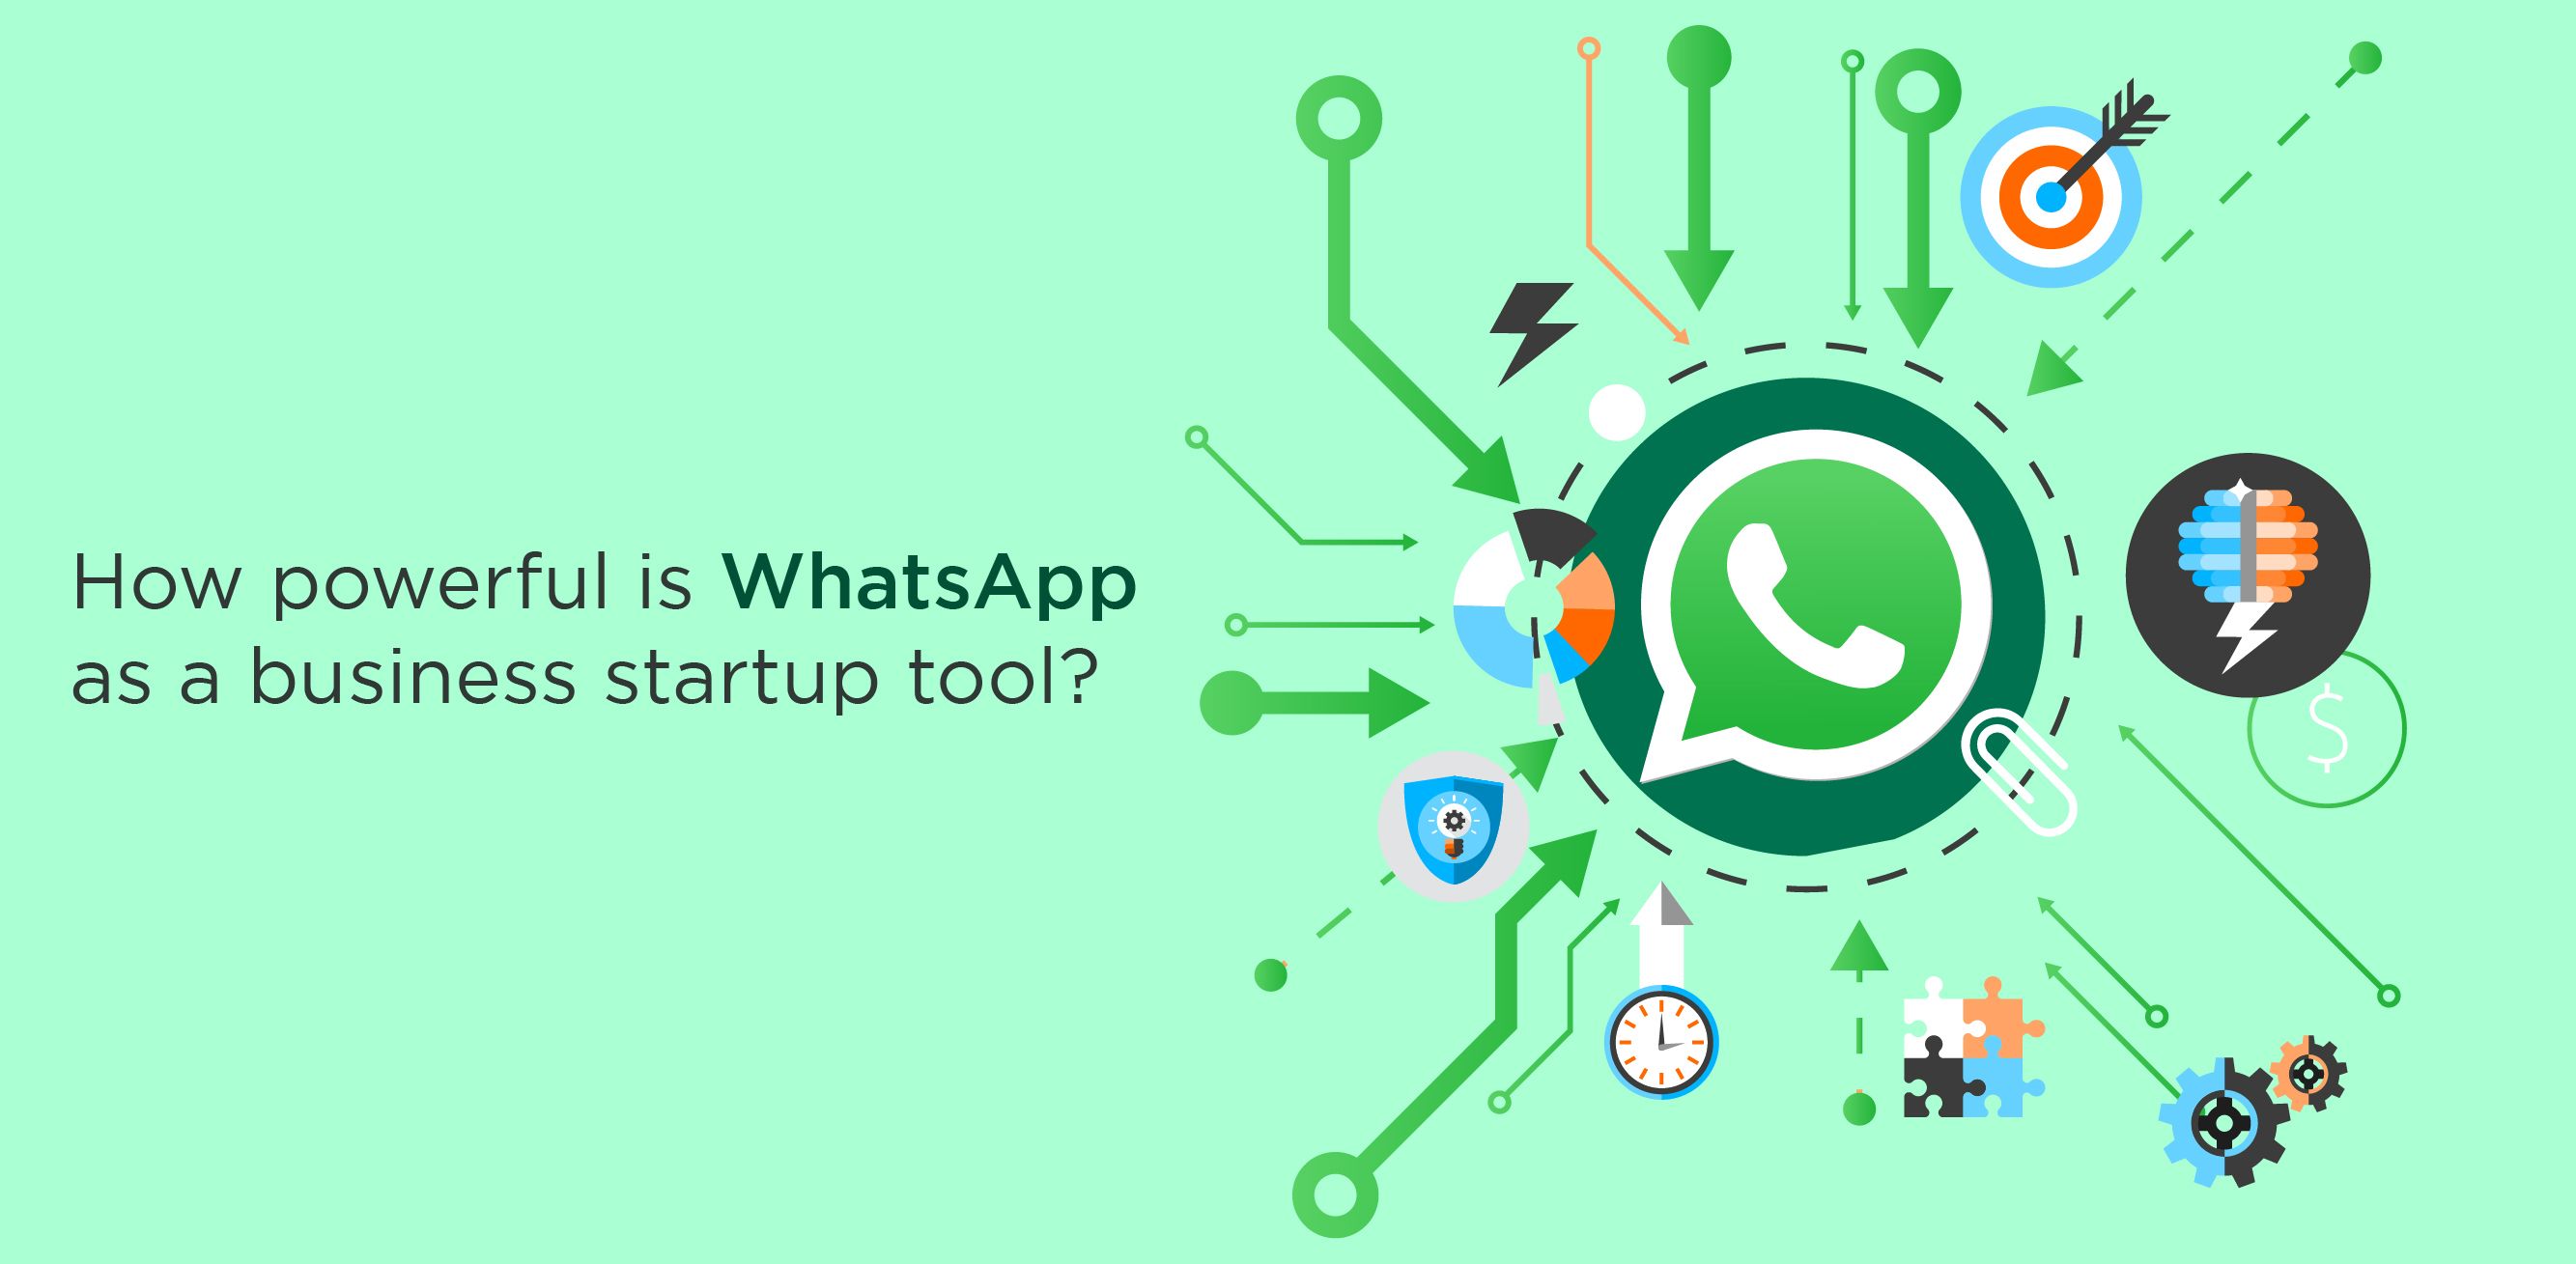 How powerful is WhatsApp as a business startup tool?